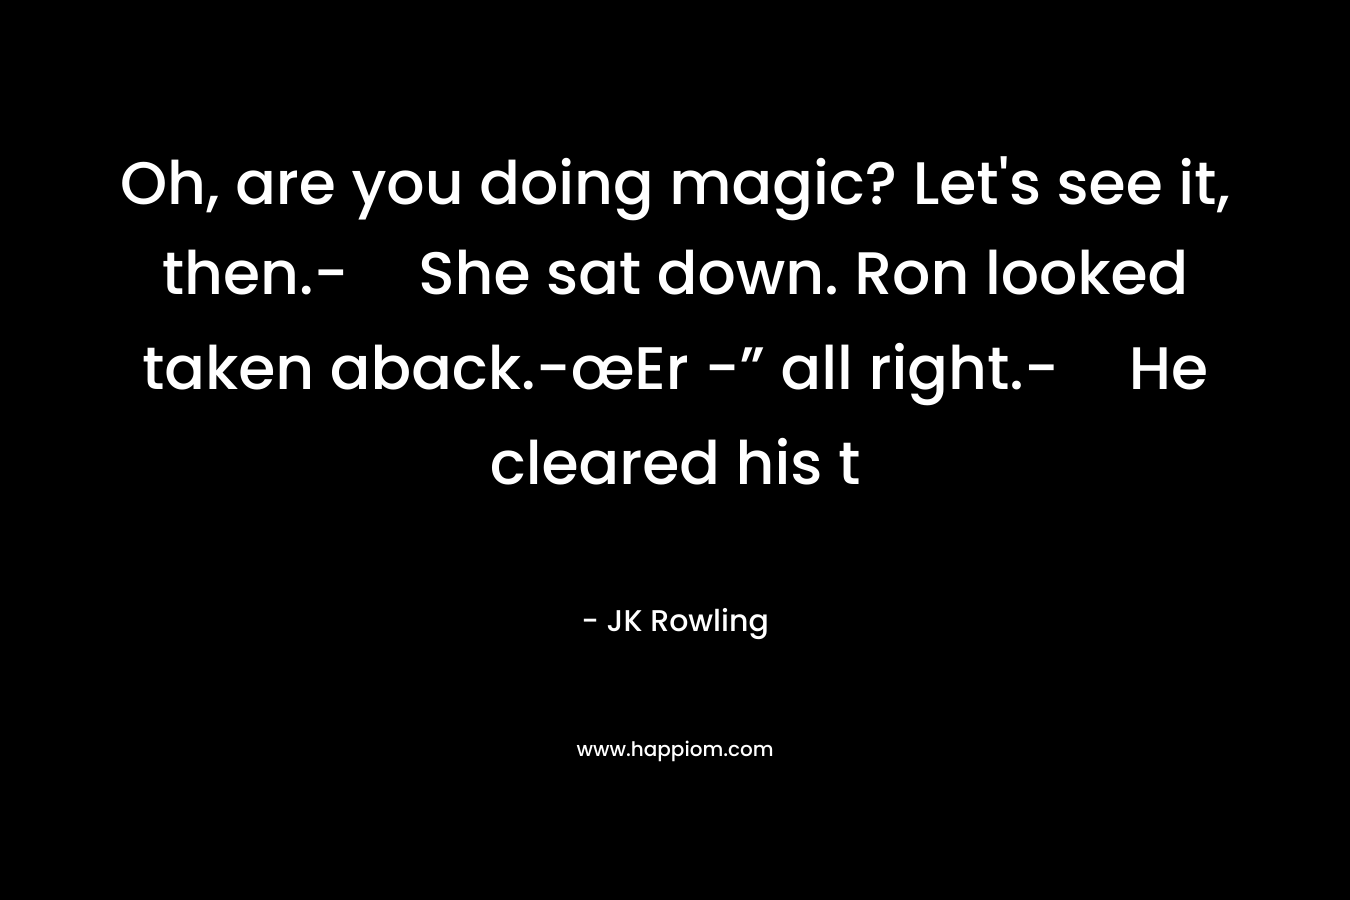 Oh, are you doing magic? Let's see it, then.-She sat down. Ron looked taken aback.-œEr -” all right.-He cleared his t